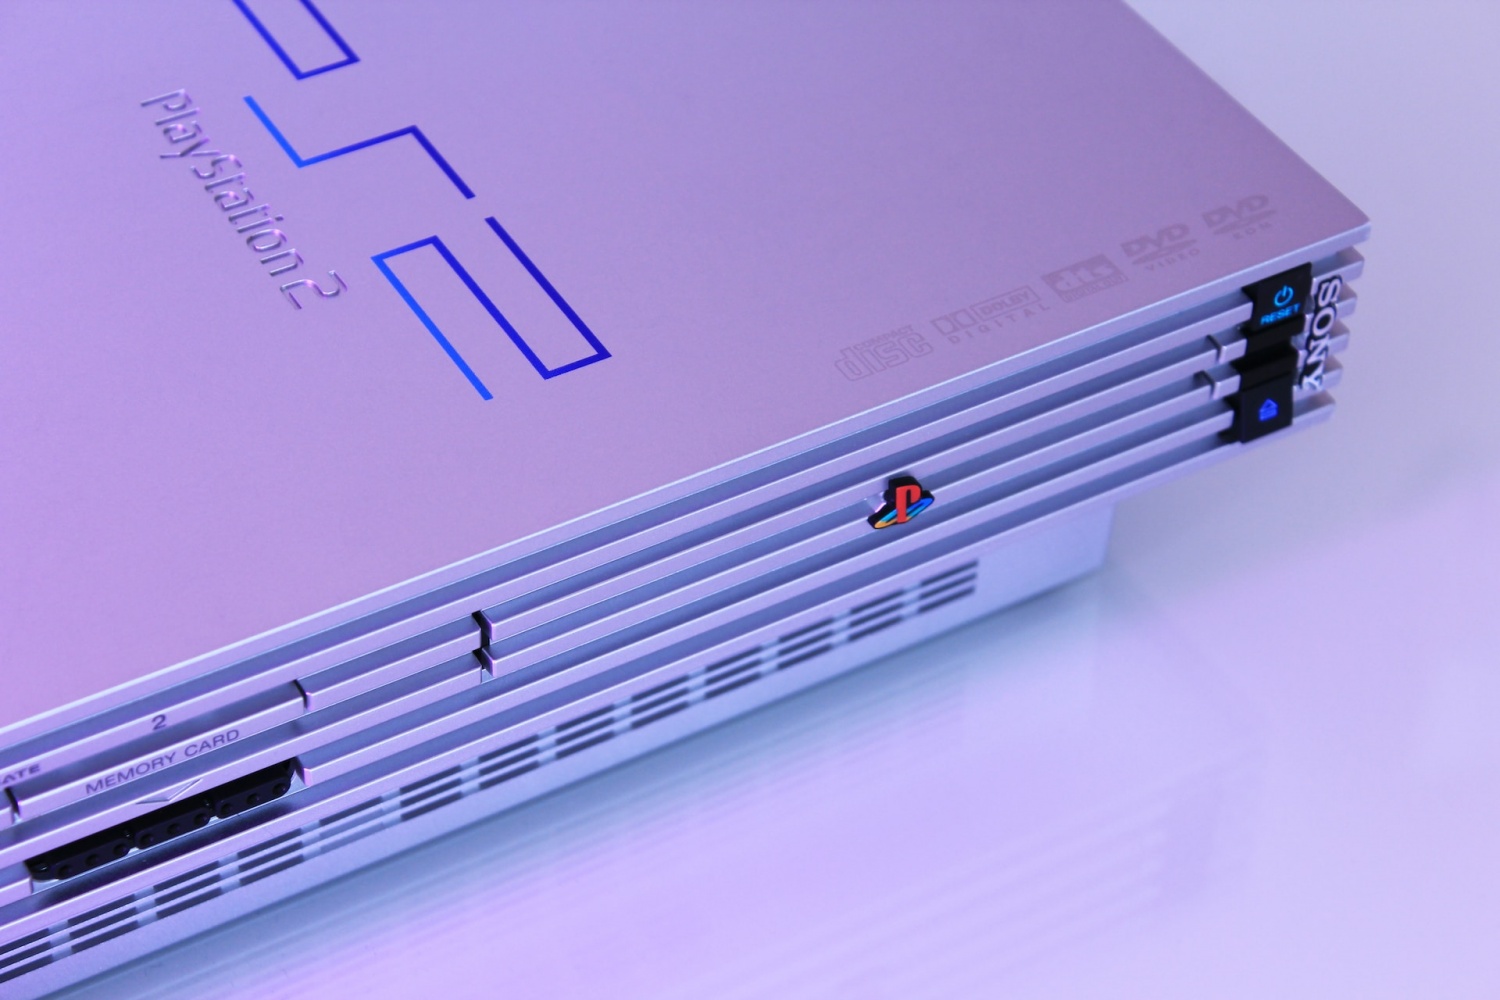 Sony Could Be Working on New PS2 Emulator for PS4, PS5